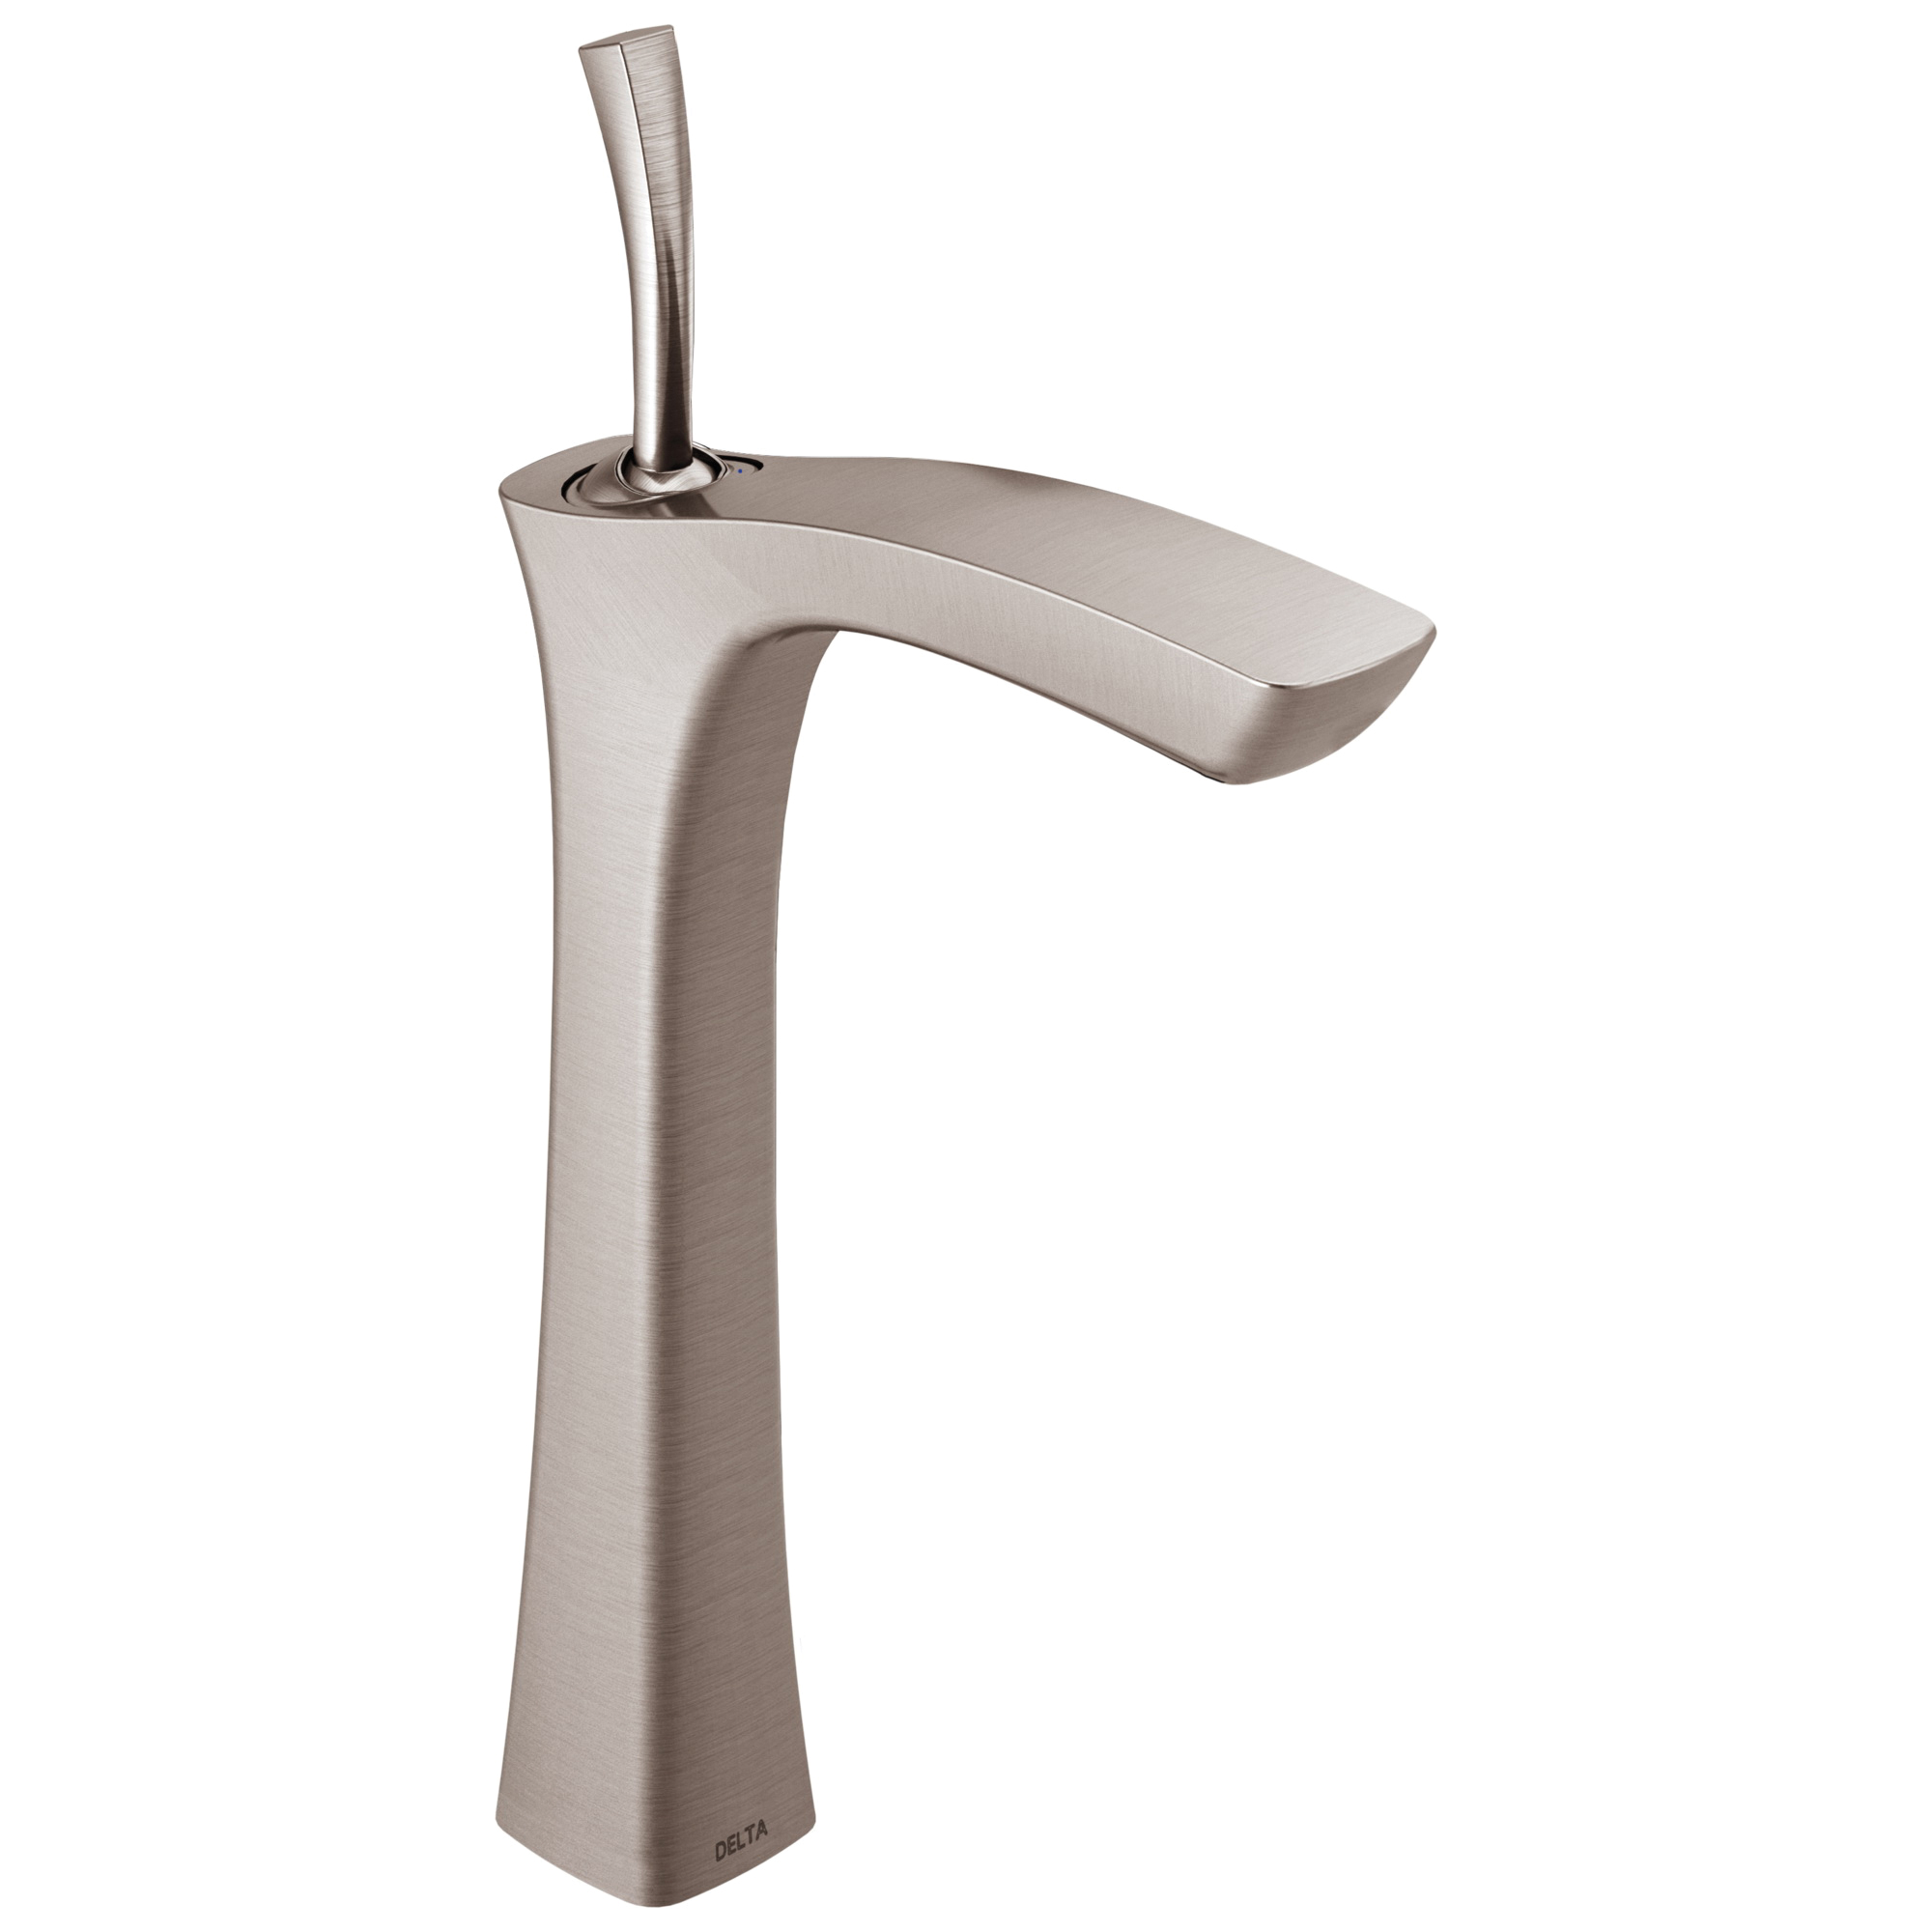 DELTA® 752LF-SS Vessel Lavatory Faucet, Tesla®, Commercial, 6 in Spout, 10-5/8 in H Spout, Stainless Steel, 1 Handles, Domestic